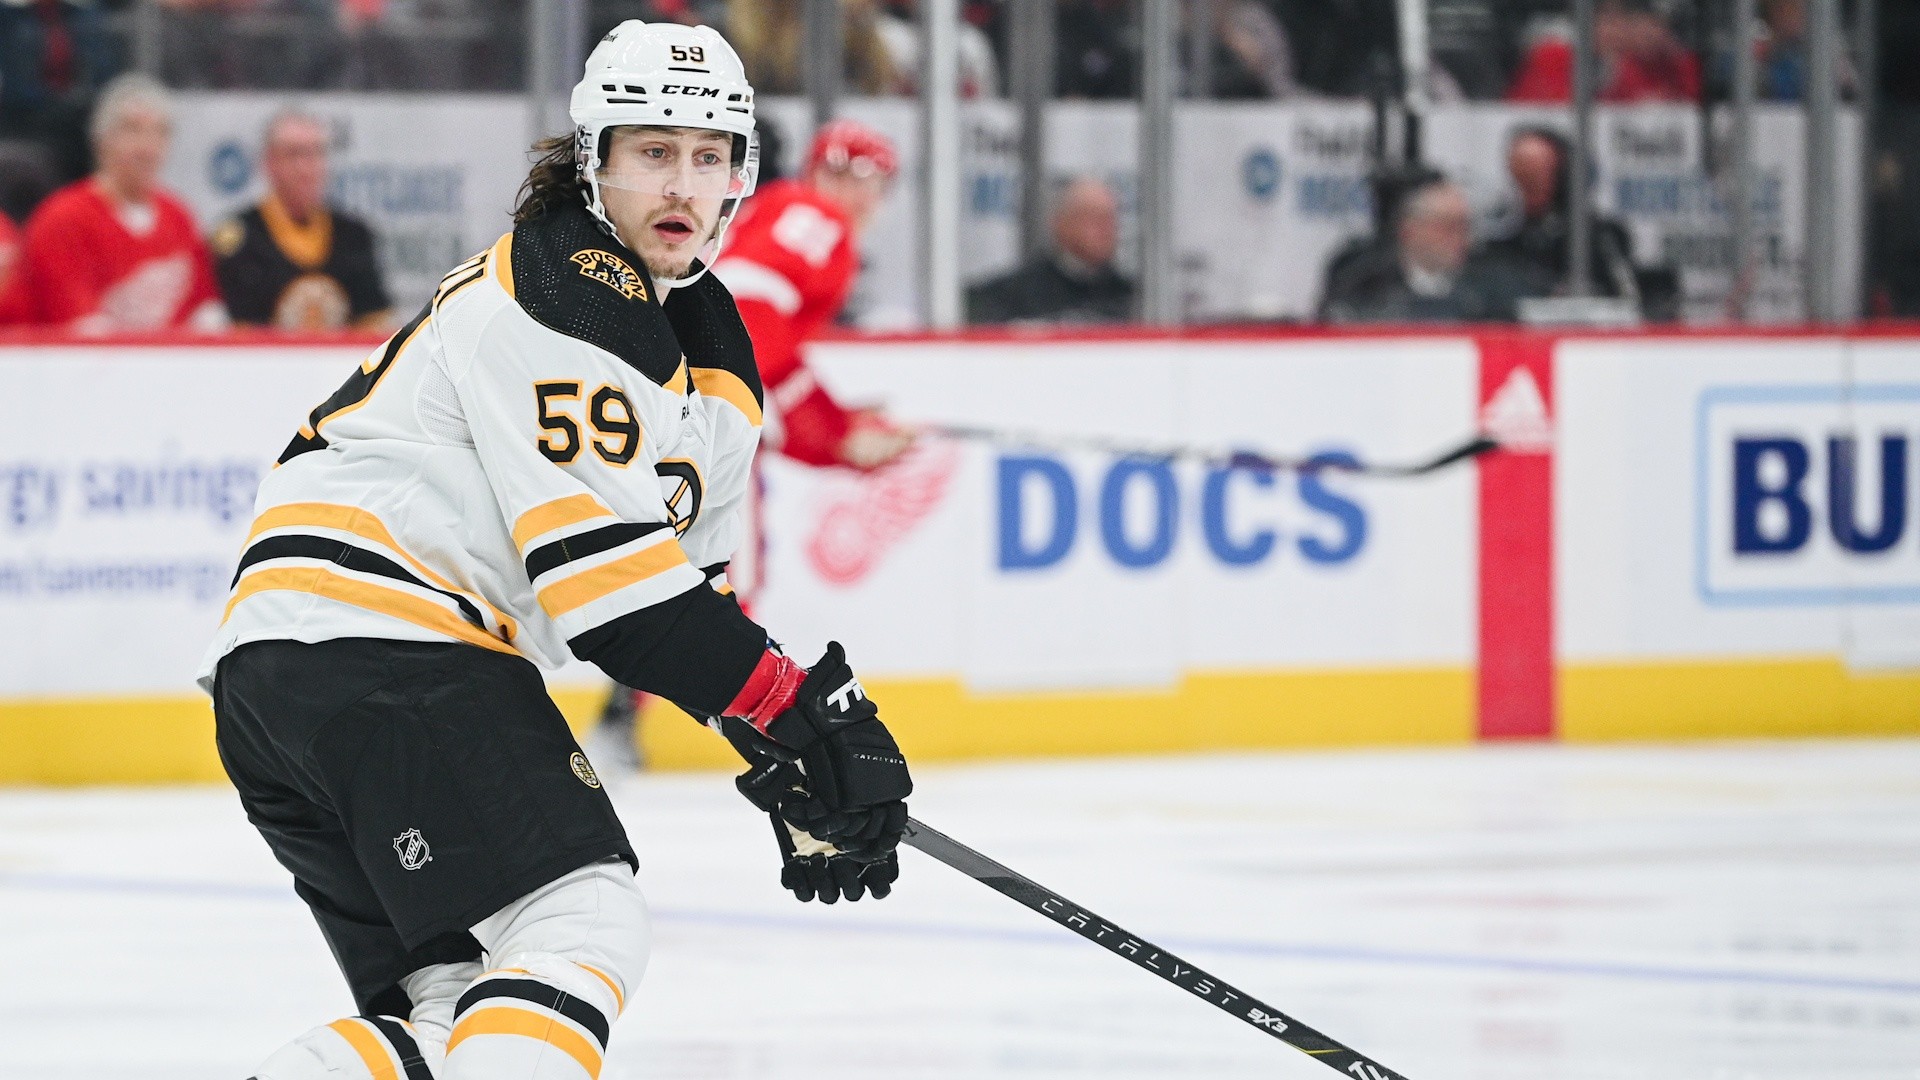 Bruins down another defenseman as McAvoy misses Game 4 - NBC Sports